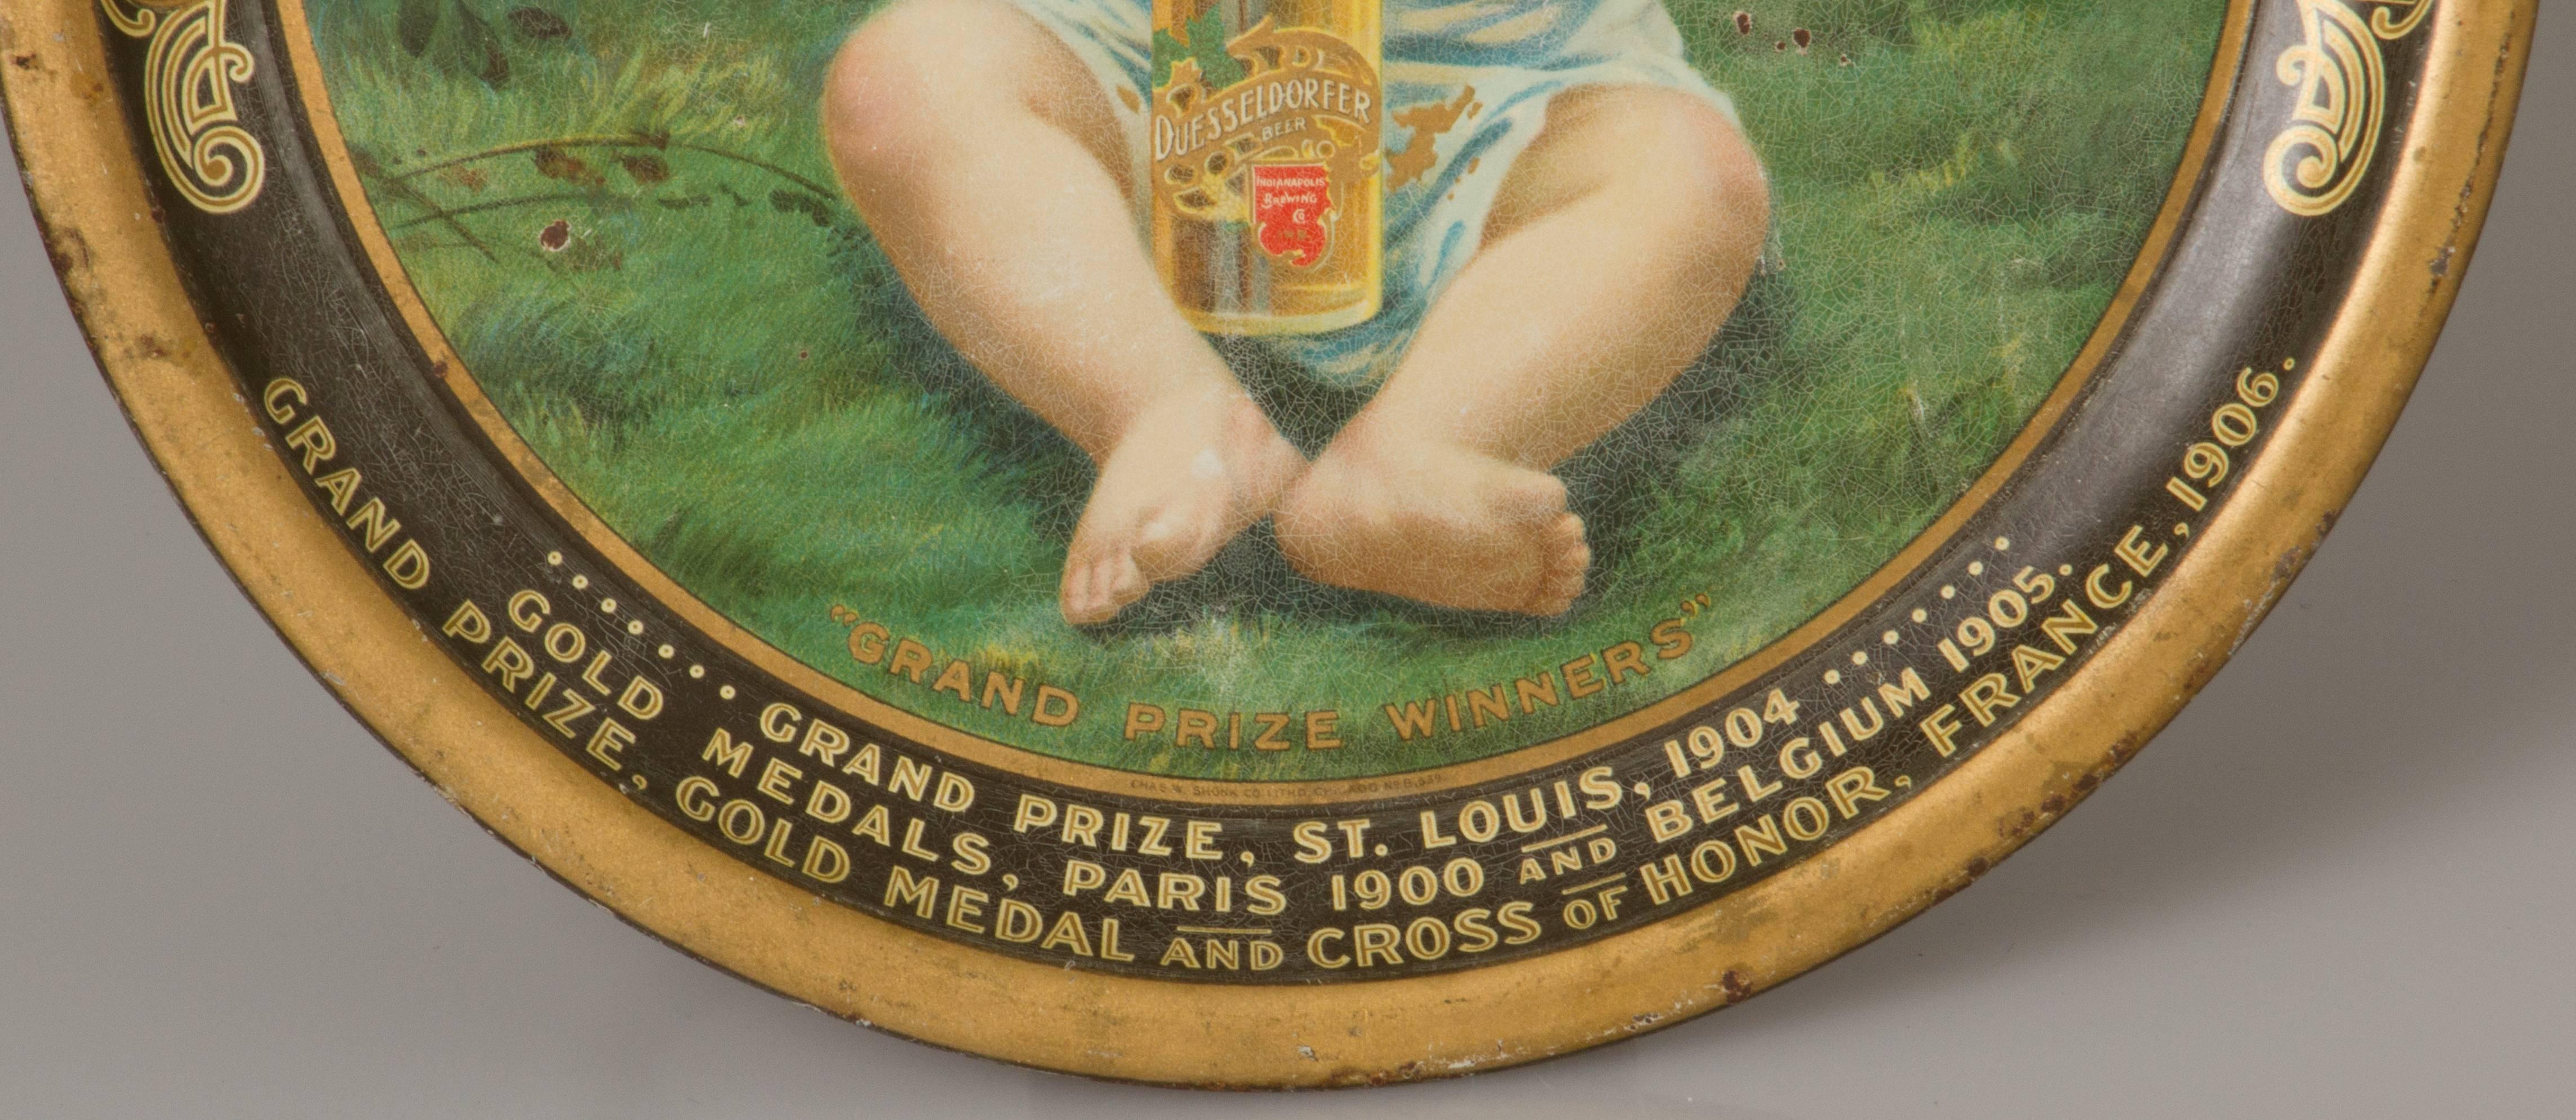 Early 20th Century Rare Duesseldorfer Beer Award Tray